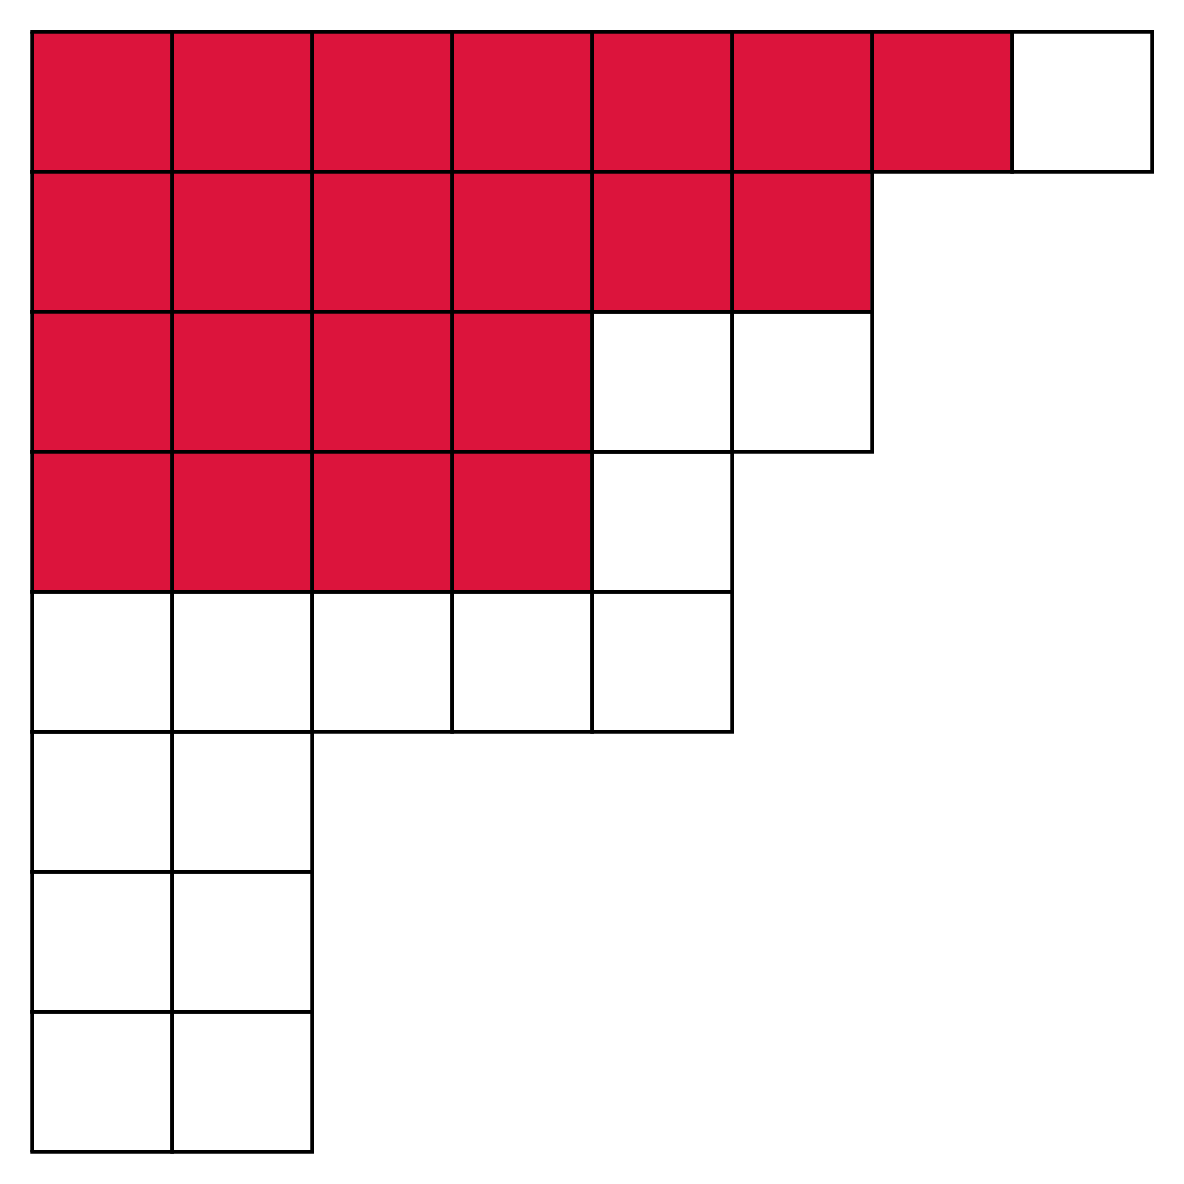 A tableau of shape (8,6,6,5,5,2,2,2) with the tableau of shape (7,6,4,4) shaded in red on top of it.